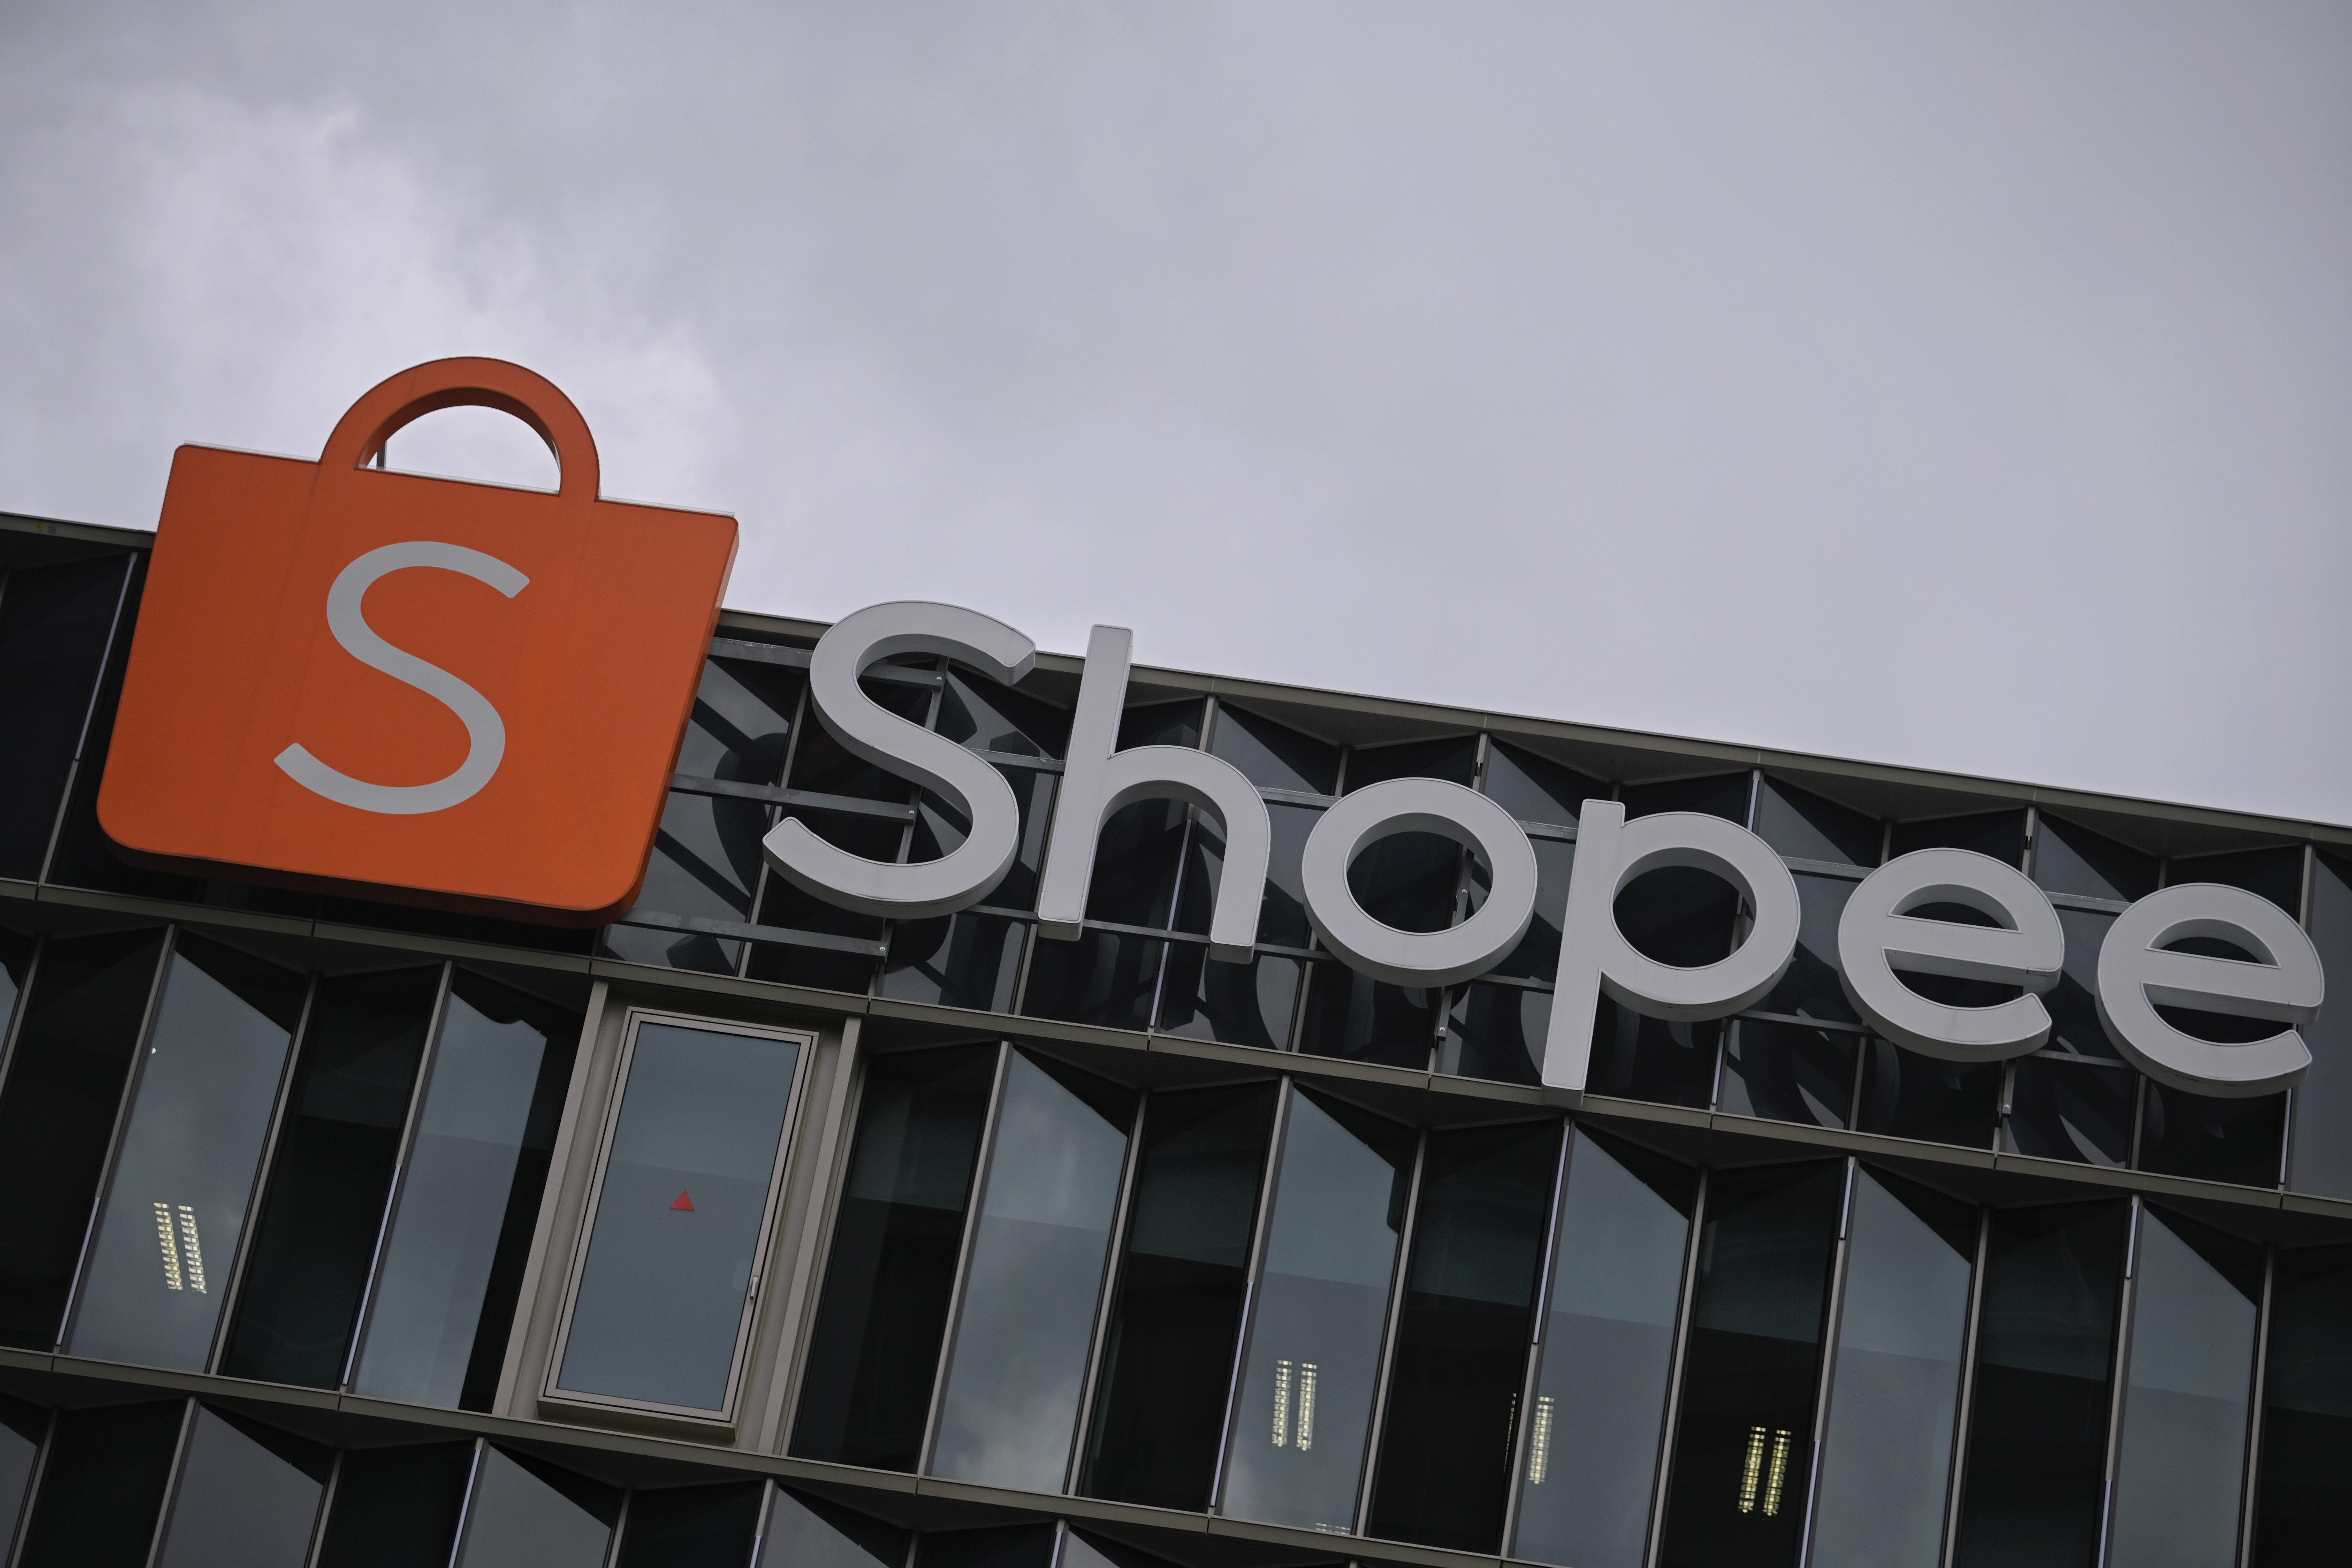 Shopee Owner Sea Misses Estimates and Warns of Future Losses With Plans to  Raise Spending